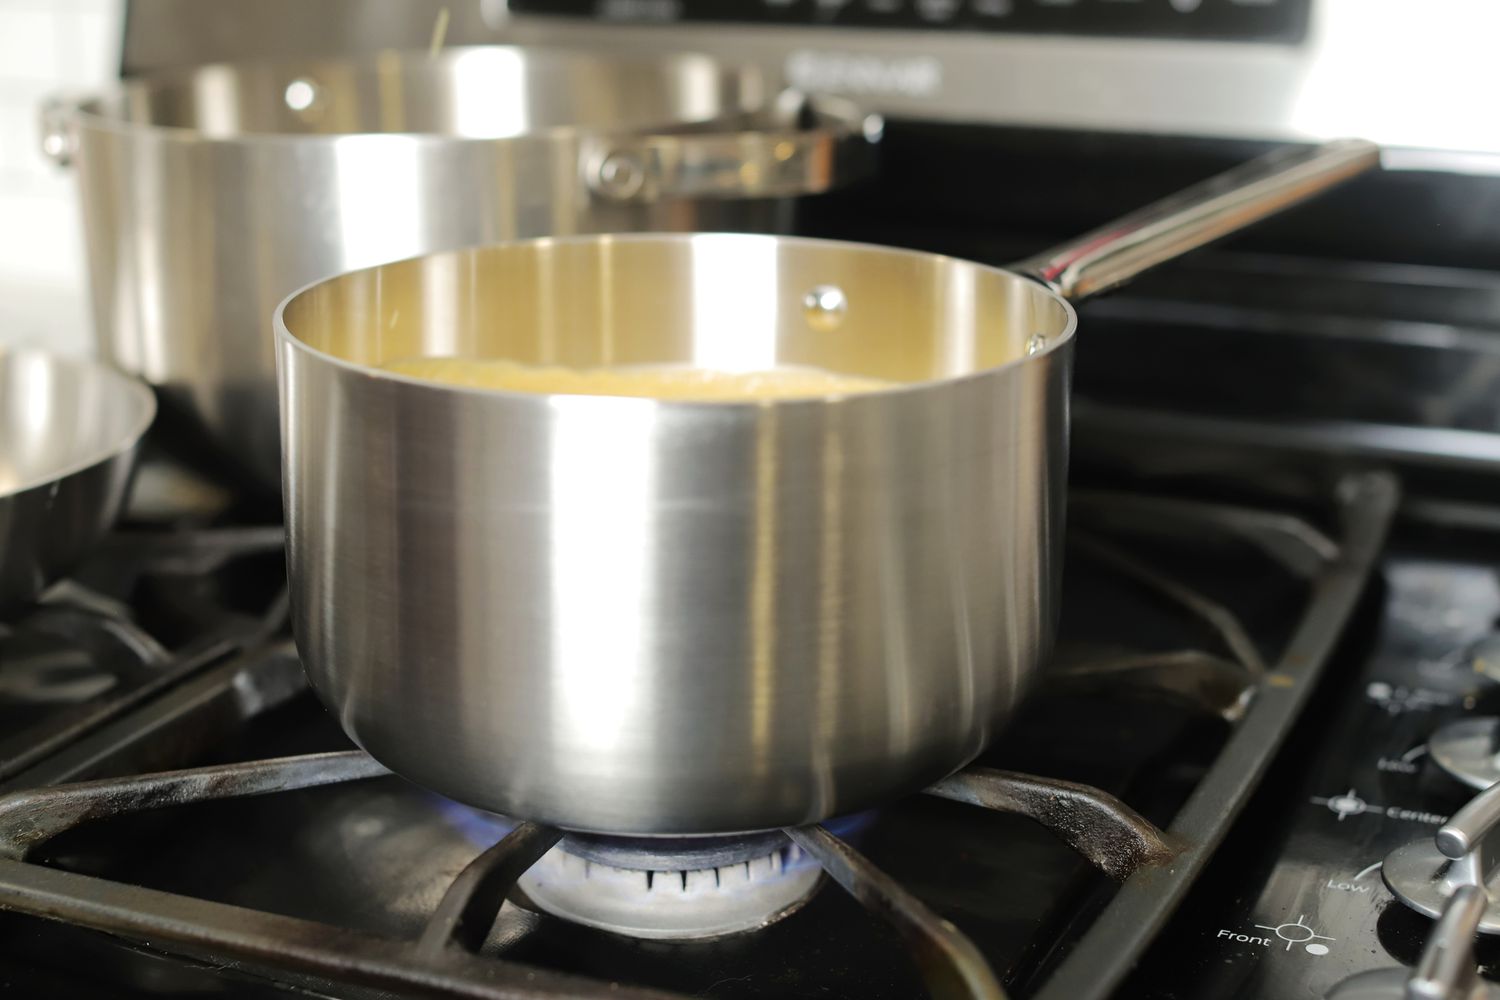 Stainless steel saucepan on a gas cooktop